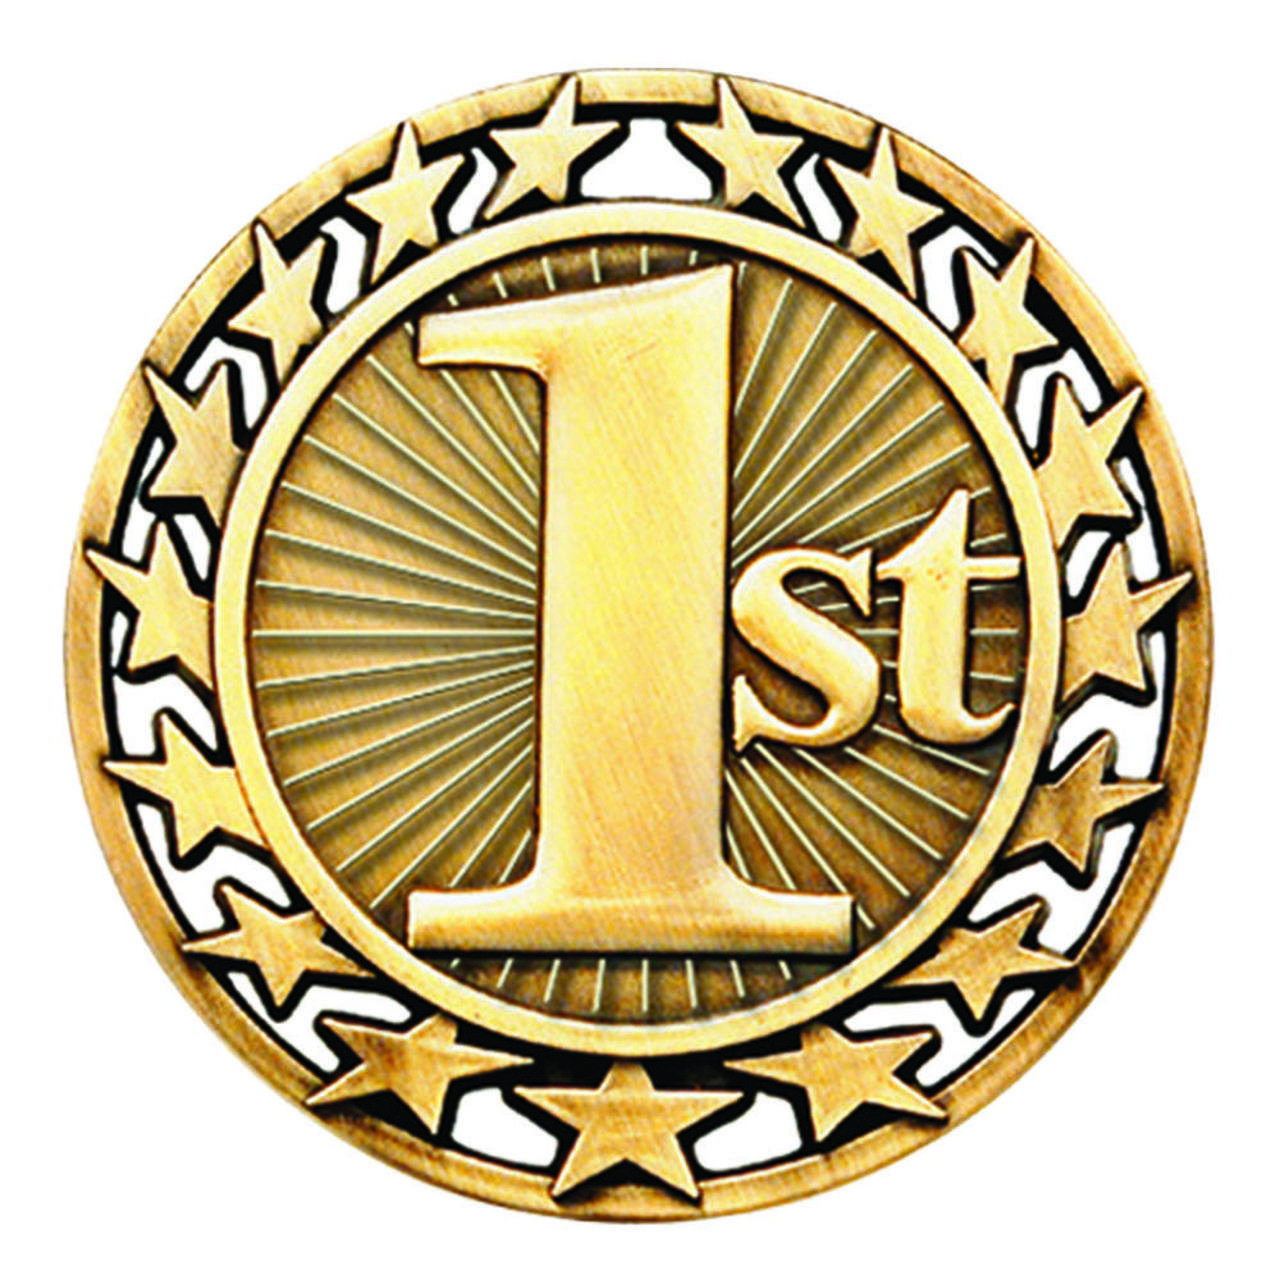 1st-place Logo - 1 2 Star 1st Place Medal